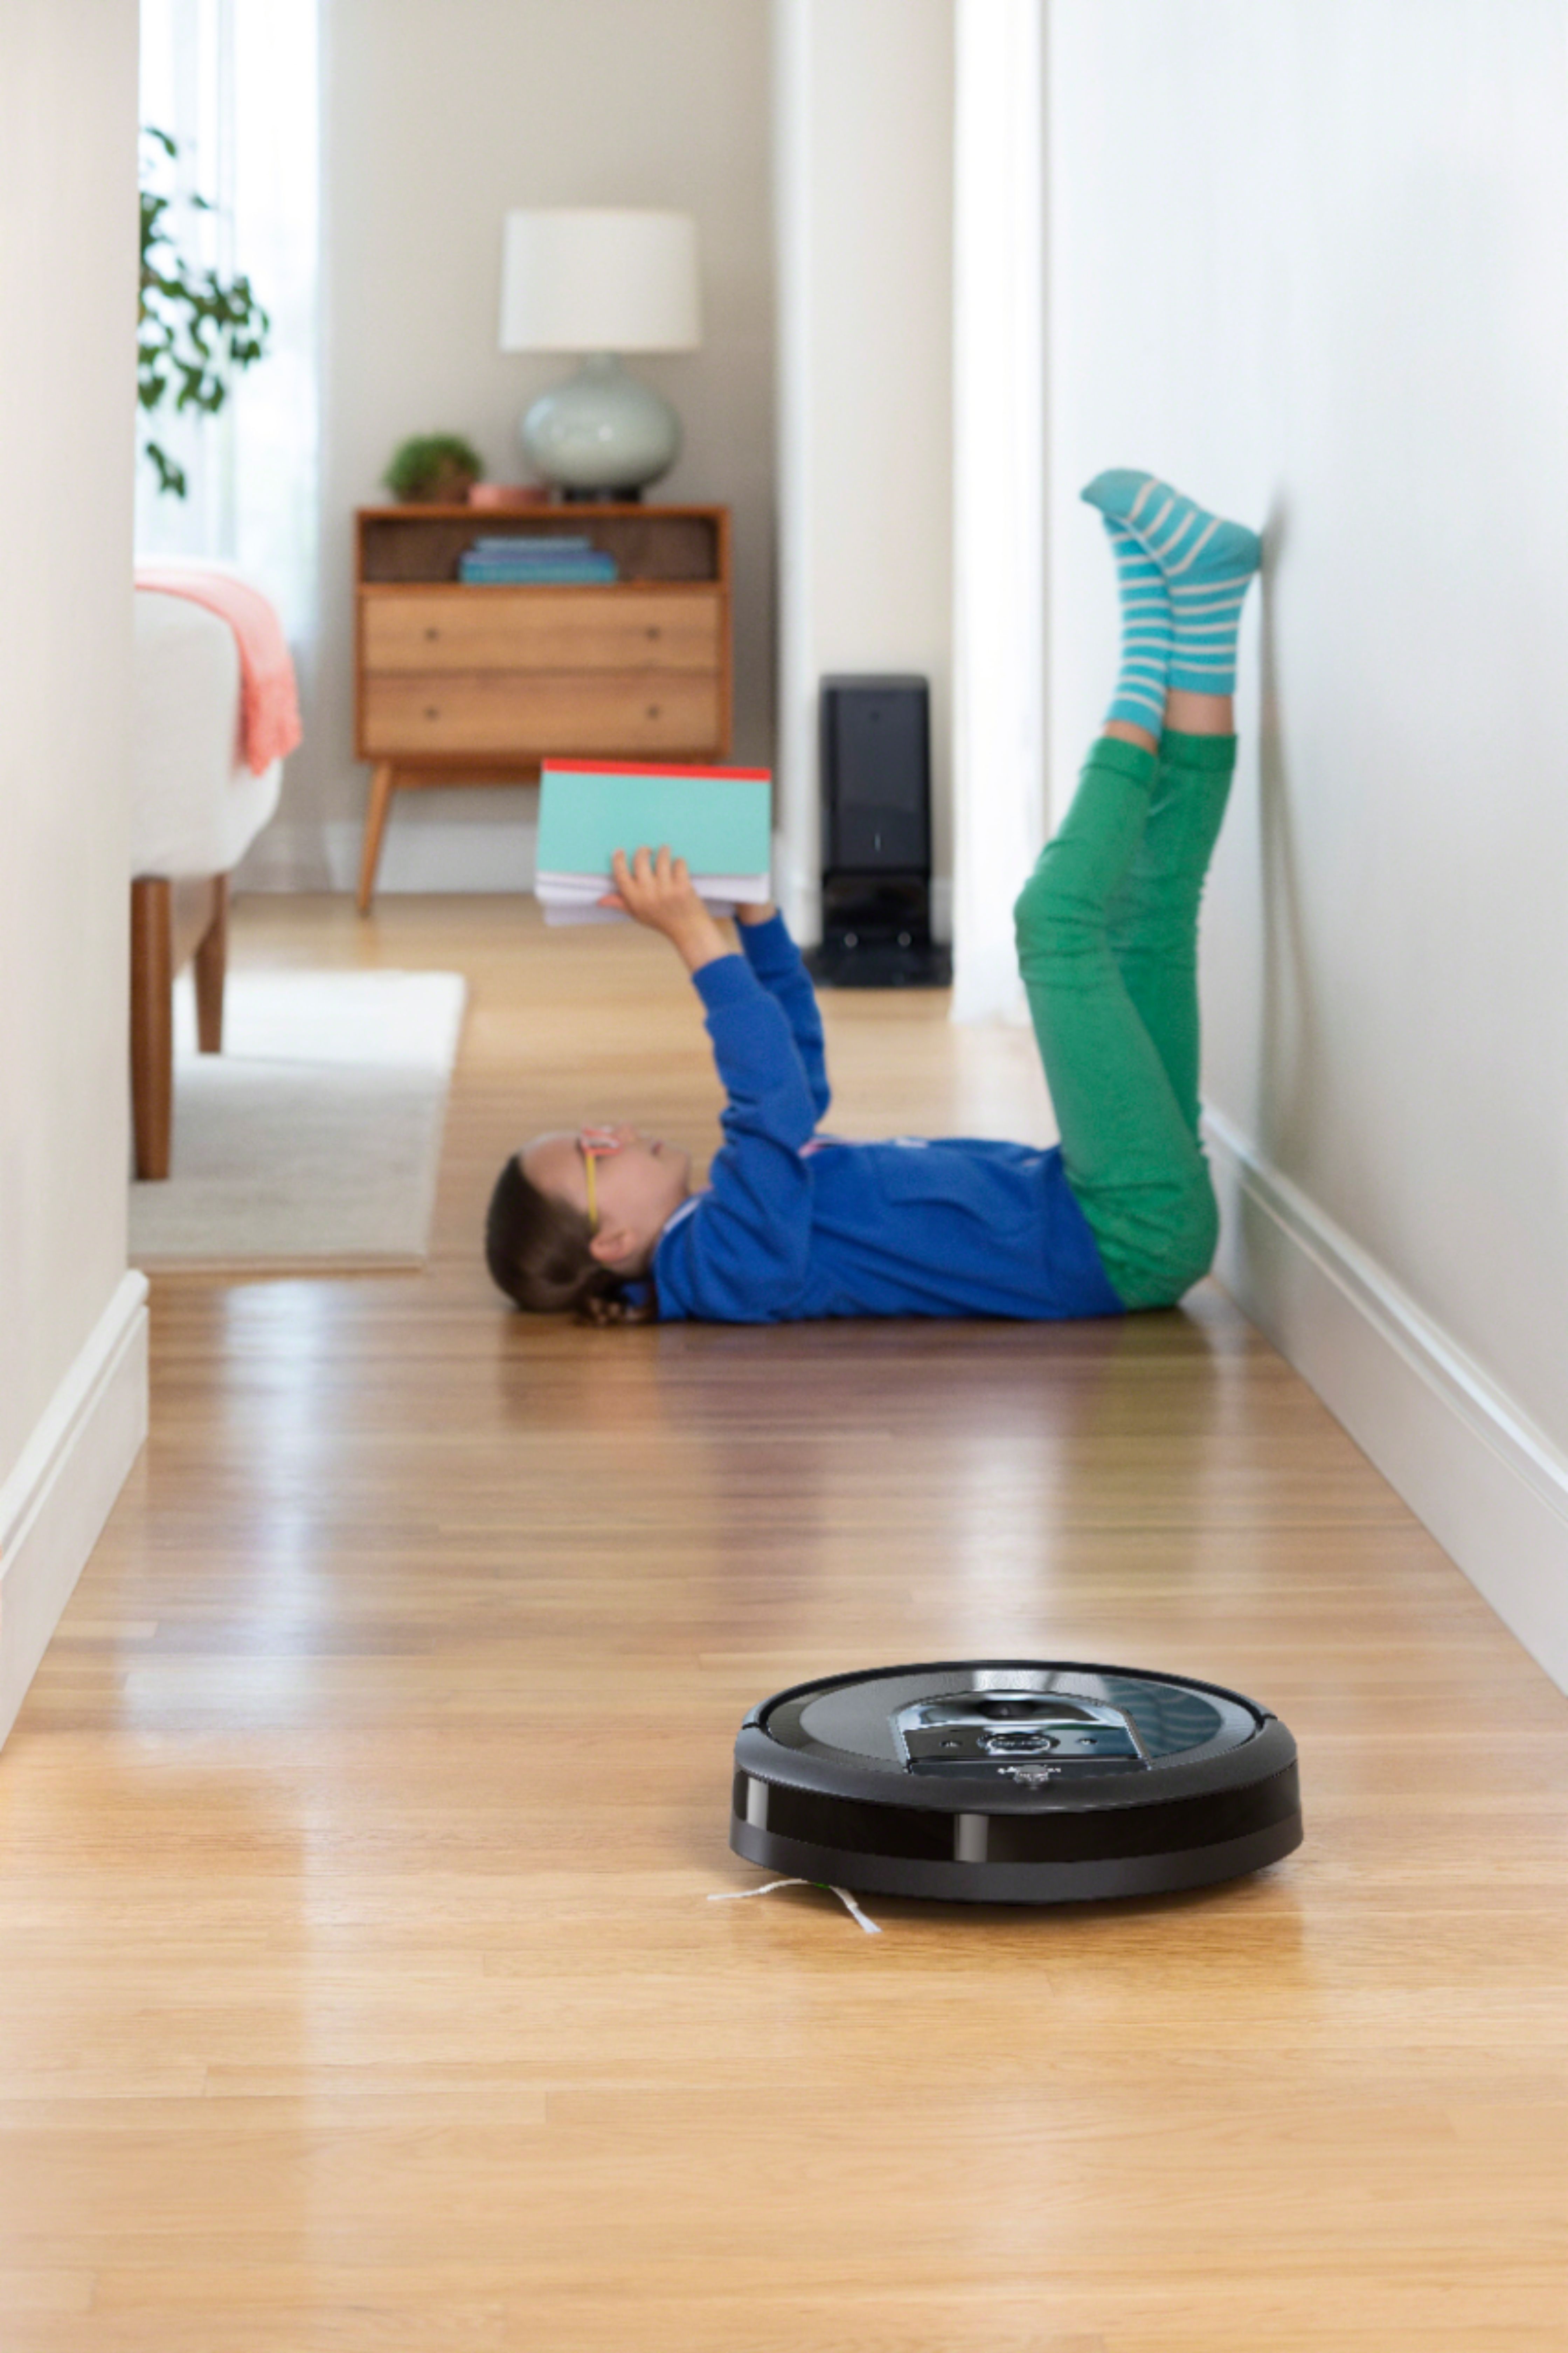  iRobot Roomba i7+ (7550) Robot Vacuum with Automatic Dirt  Disposal - Empties Itself for up to 60 Days, Wi-Fi Connected, Smart  Mapping, Works with Alexa, Ideal for Pet Hair, Carpets